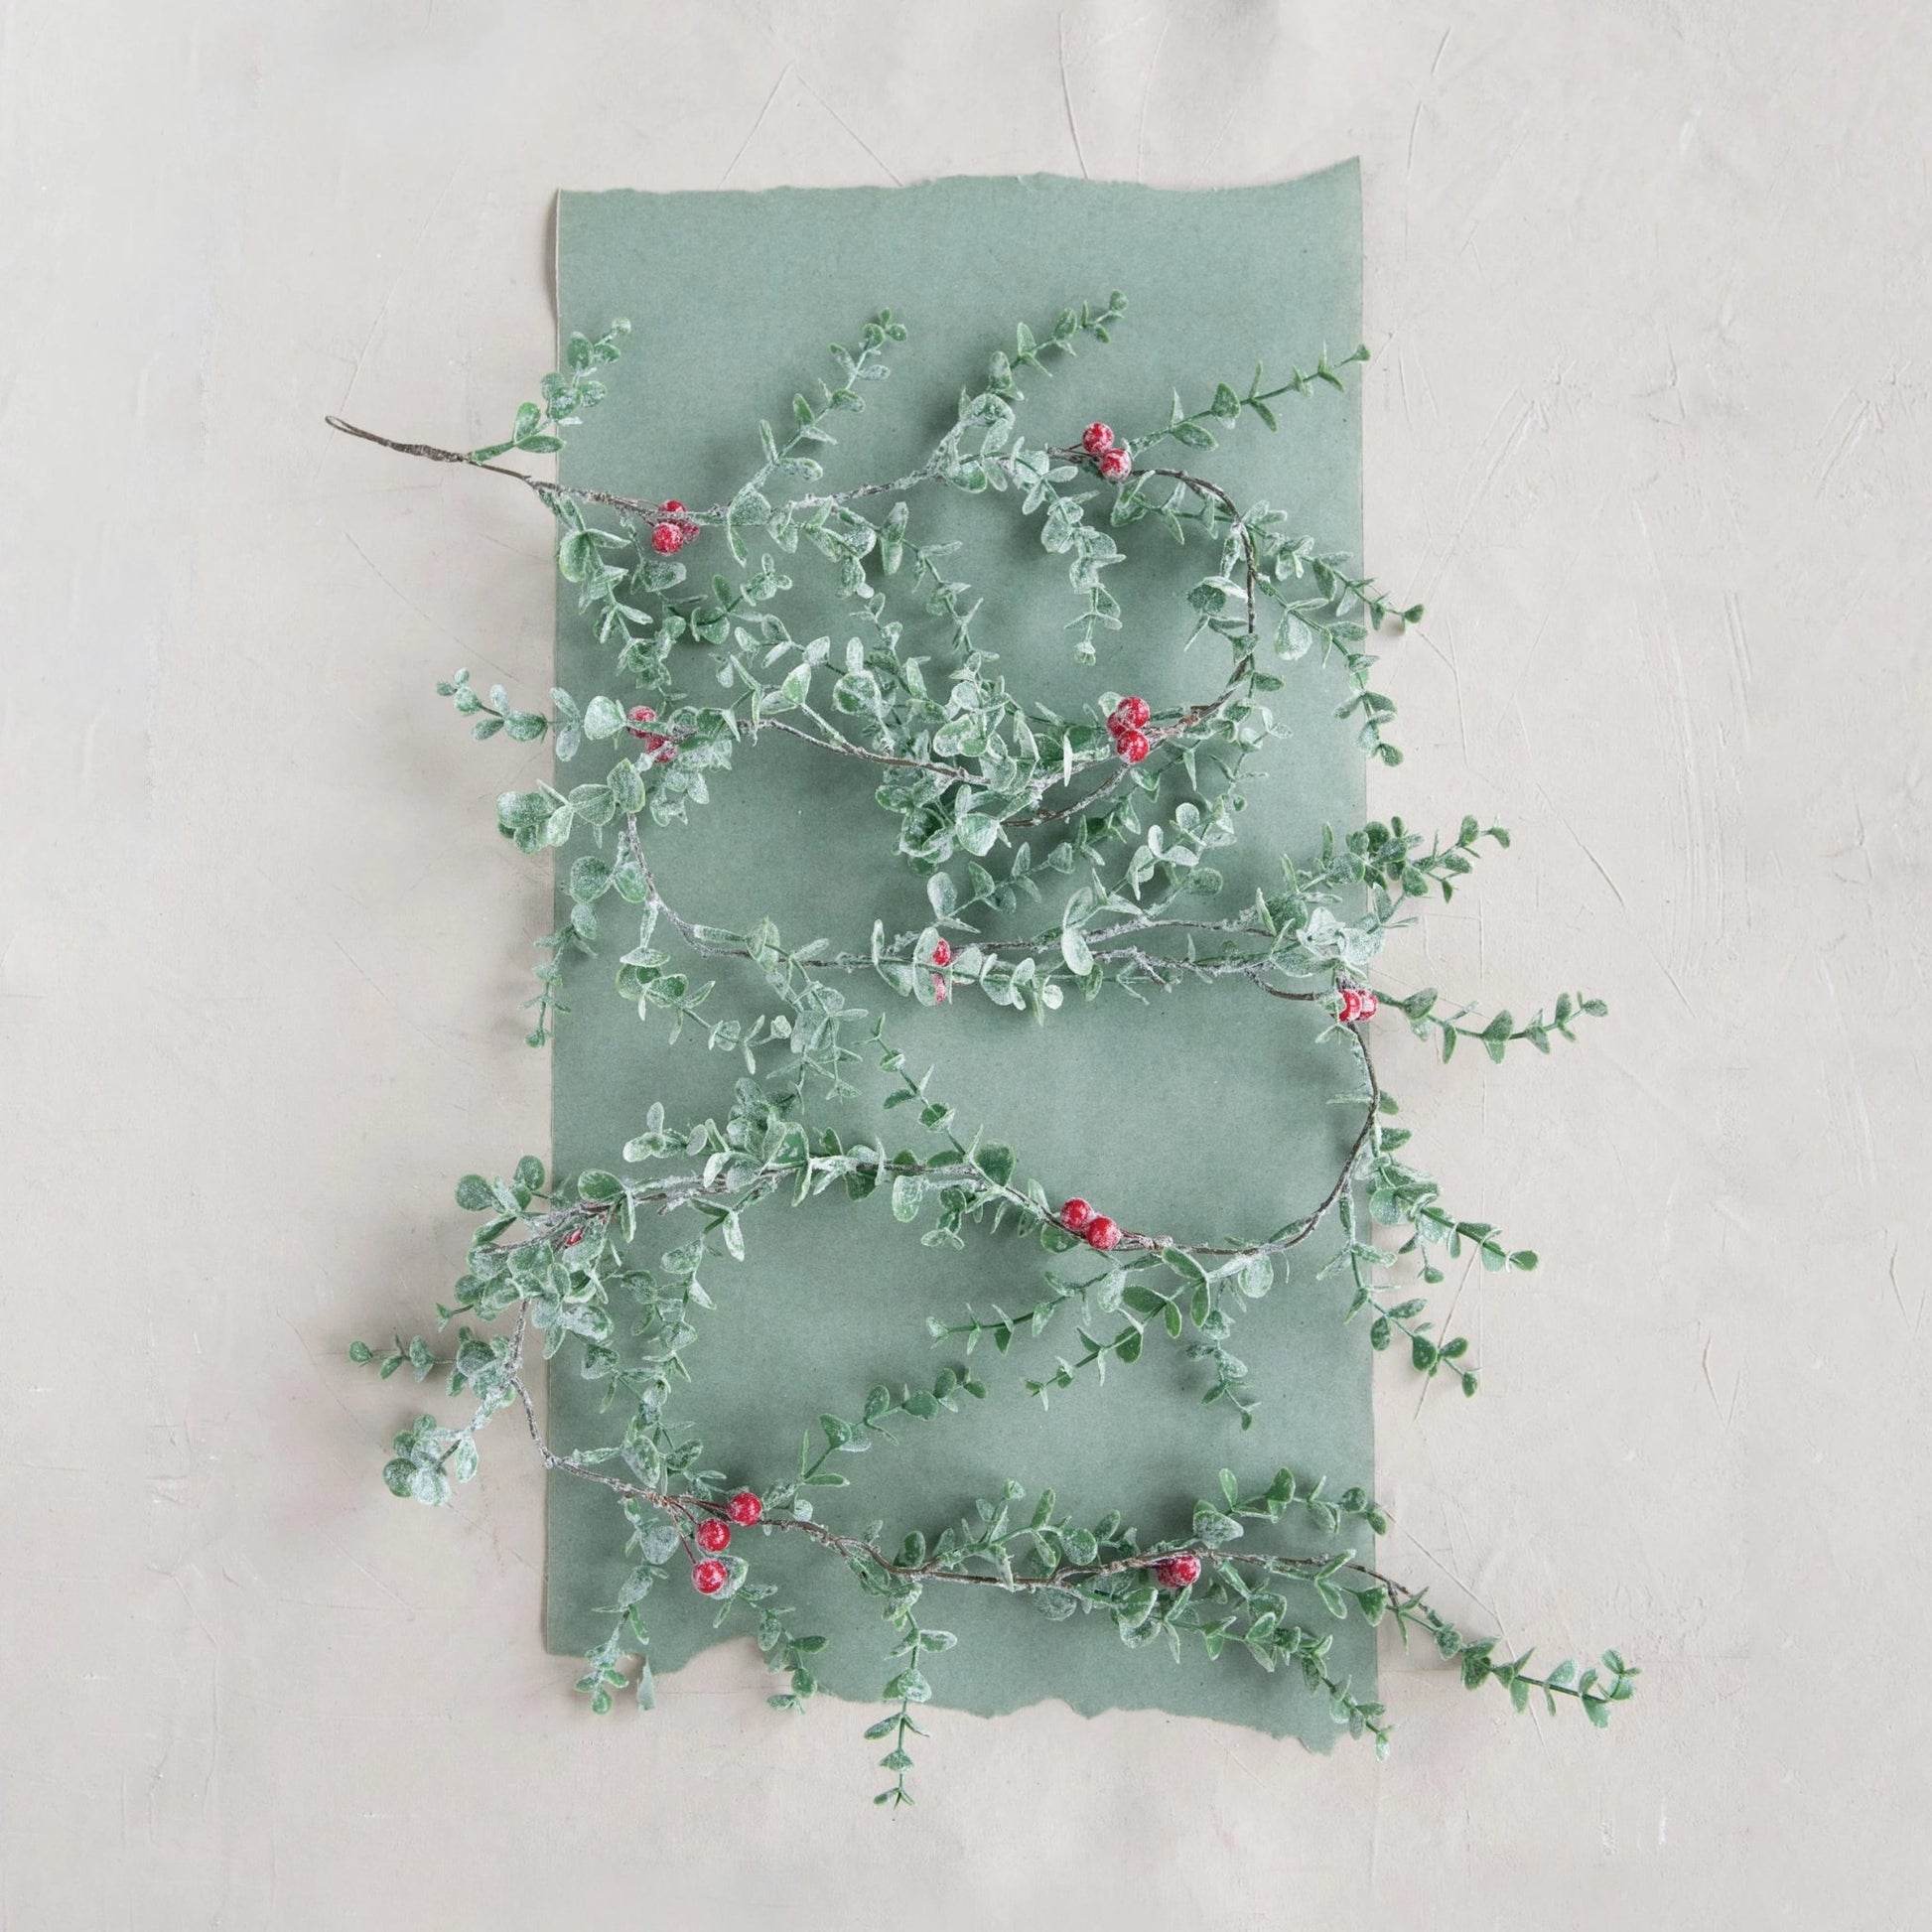 Faux Boxwood Garland with Berries - Royalties